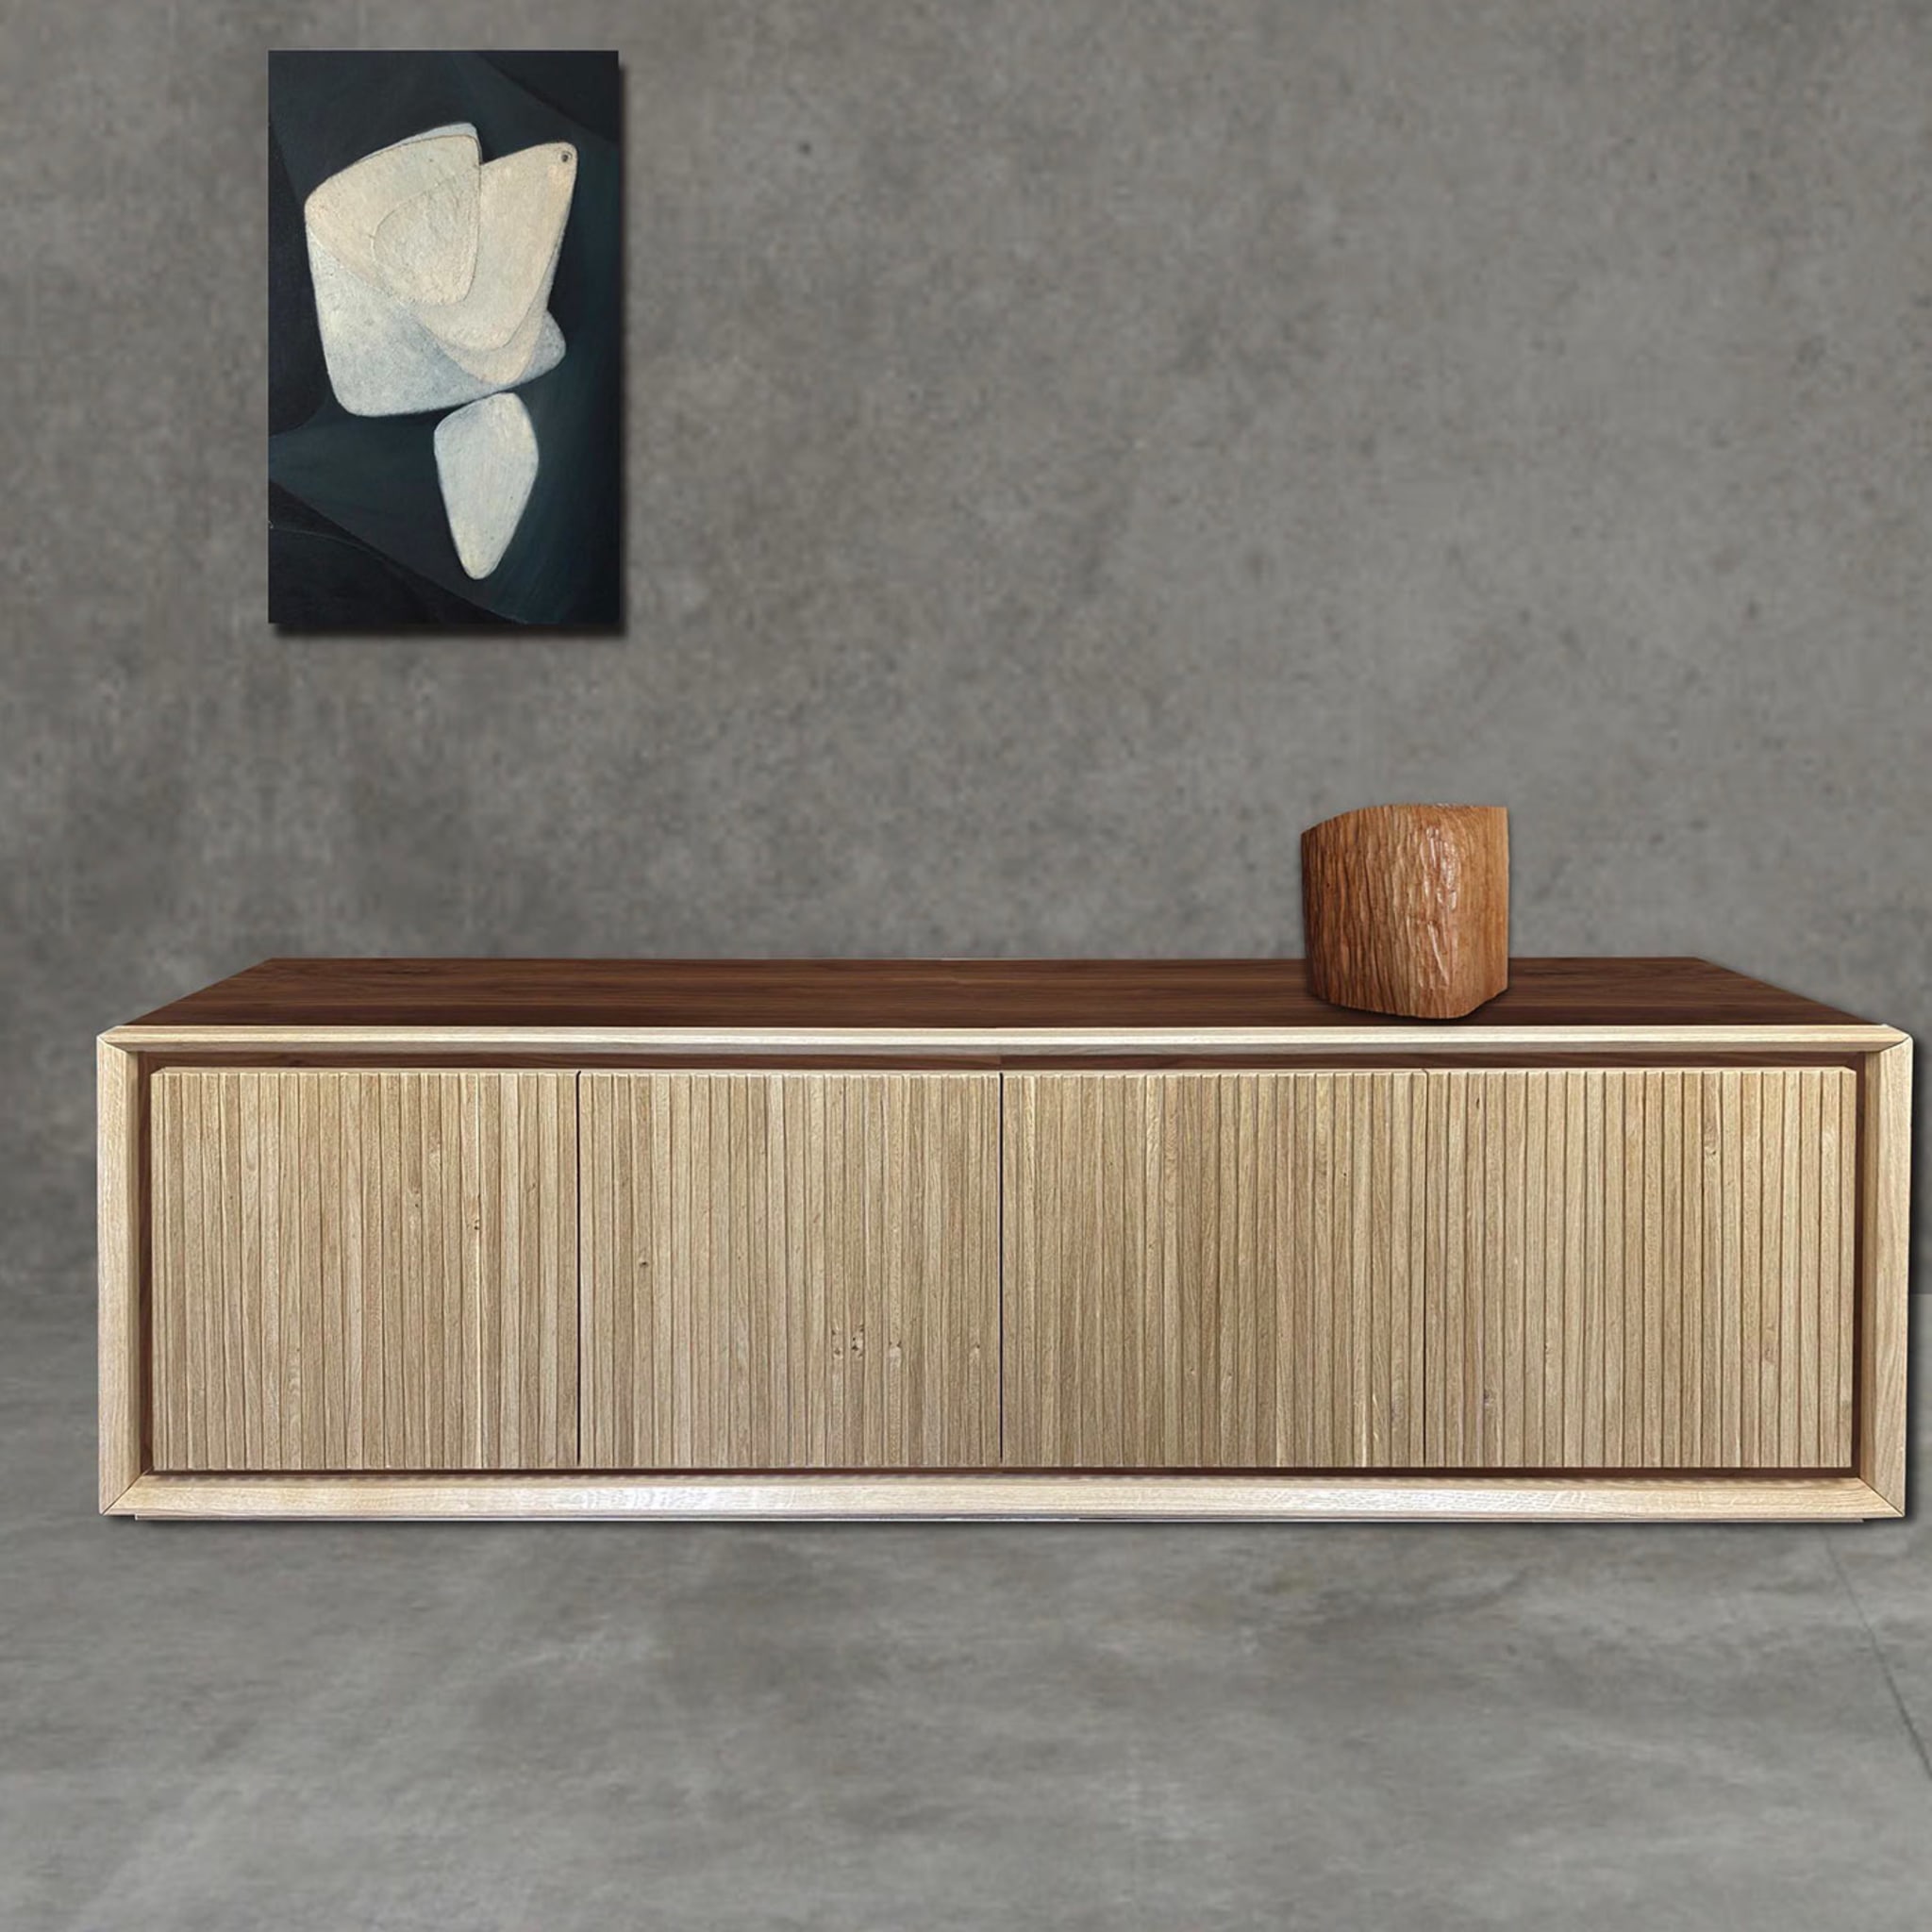 Fuga Noce Uno 4-Door Grooved Sideboard by Mascia Meccani - Alternative view 5